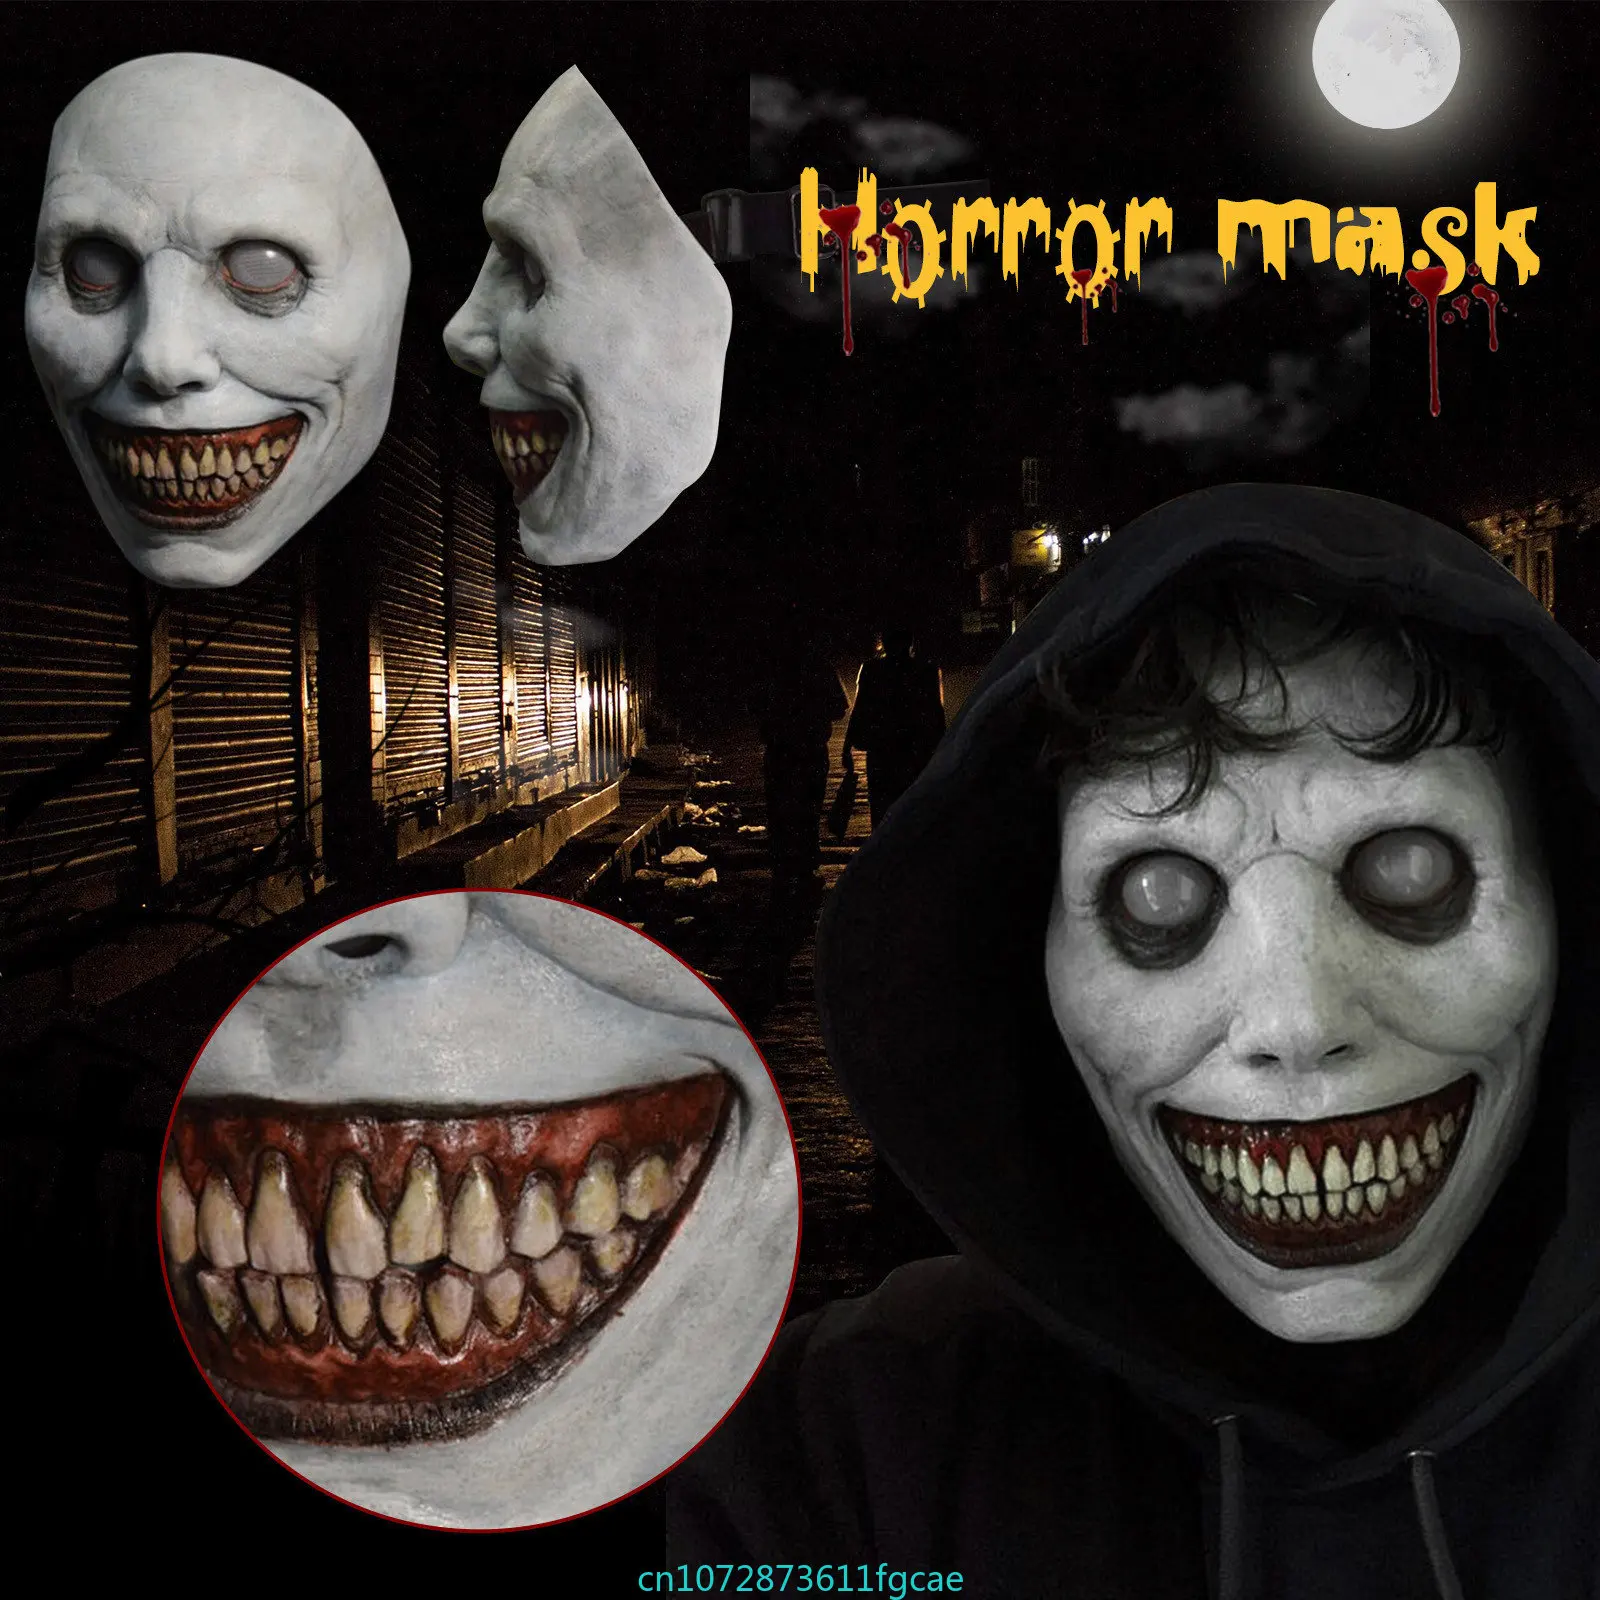 

Anime Smiling Demon Horror Latex Mask The Evil Devil Helmet Cosplay Scary Props Masquerade Pu 'er Festival Christmas Party Gifts